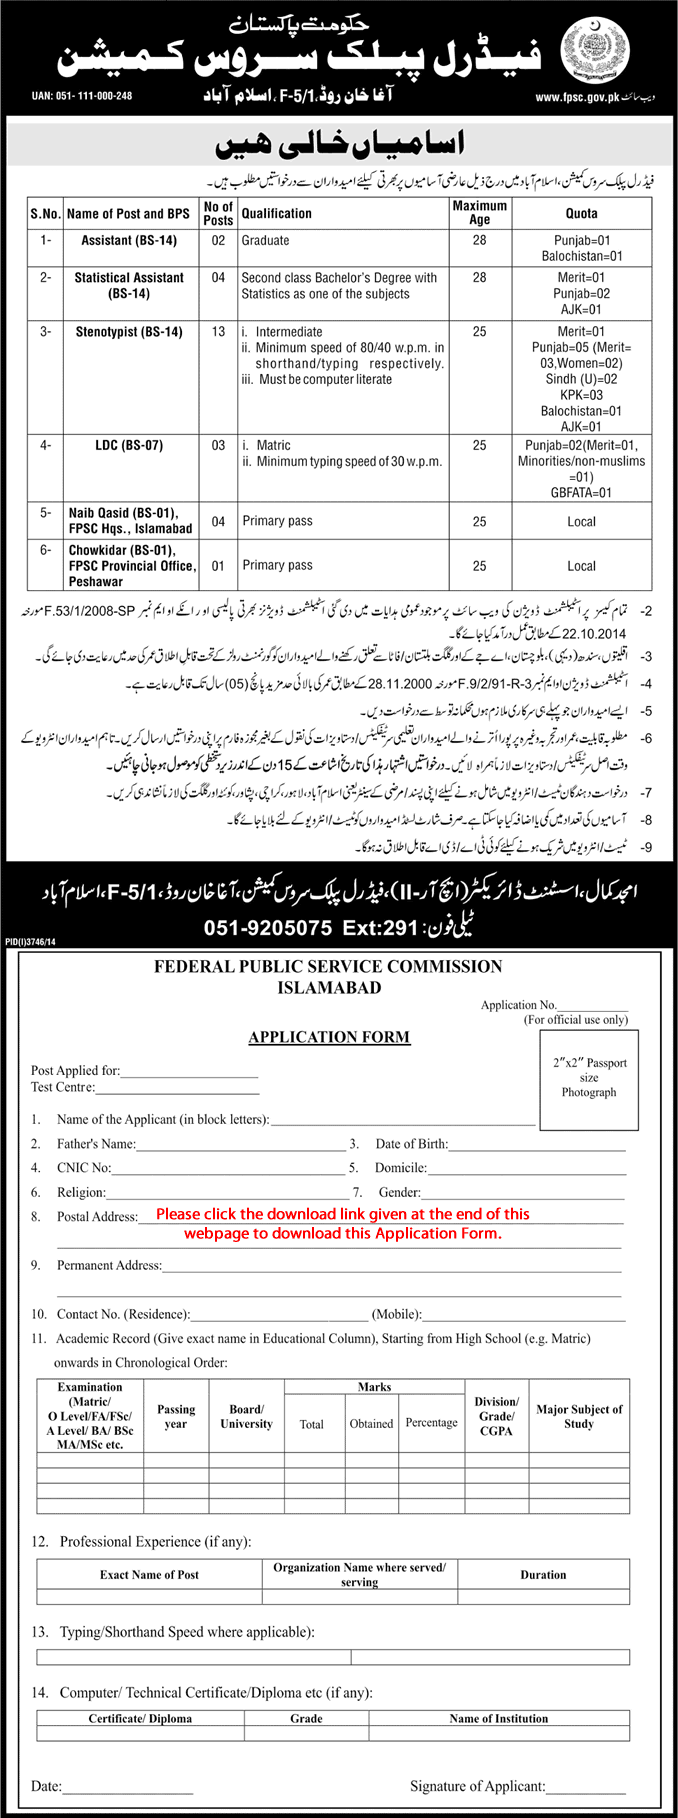 Federal Public Service Commission Islamabad Jobs 2015 FPSC Application Form Download Latest